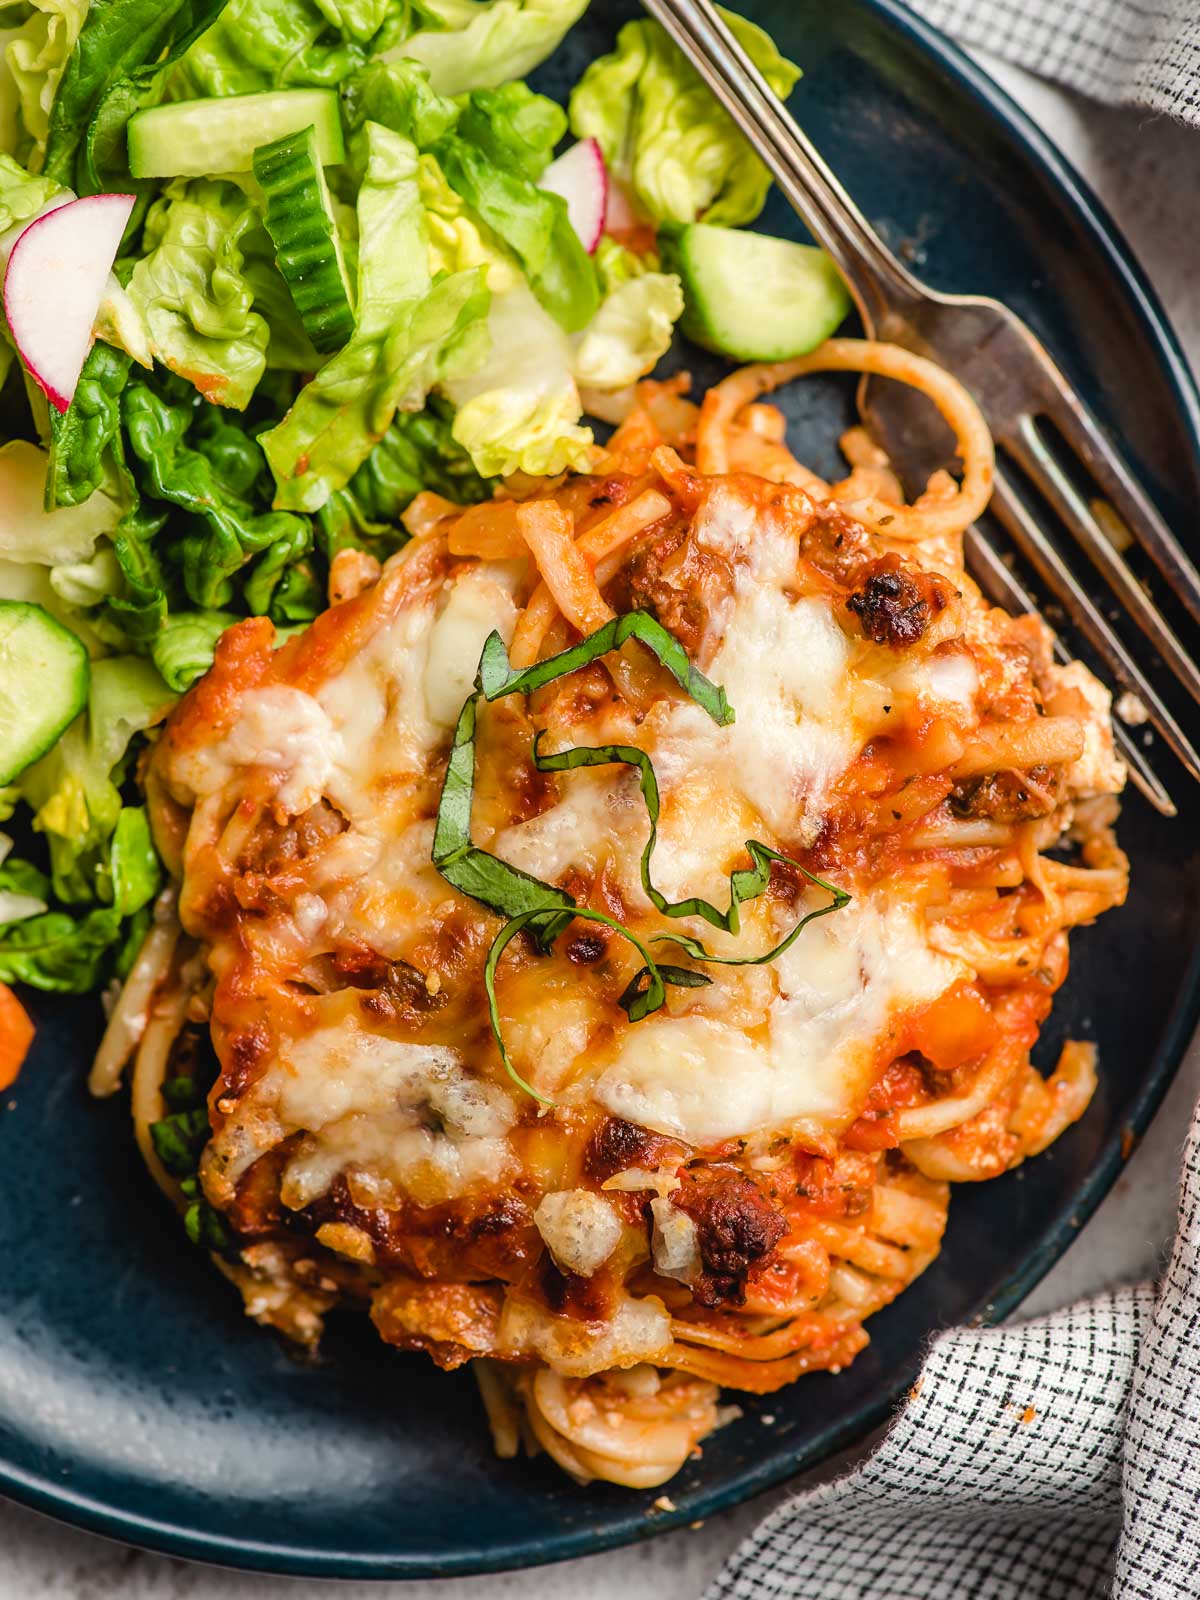 Cheesy baked spaghetti on a blue plate with salad greens on the side.